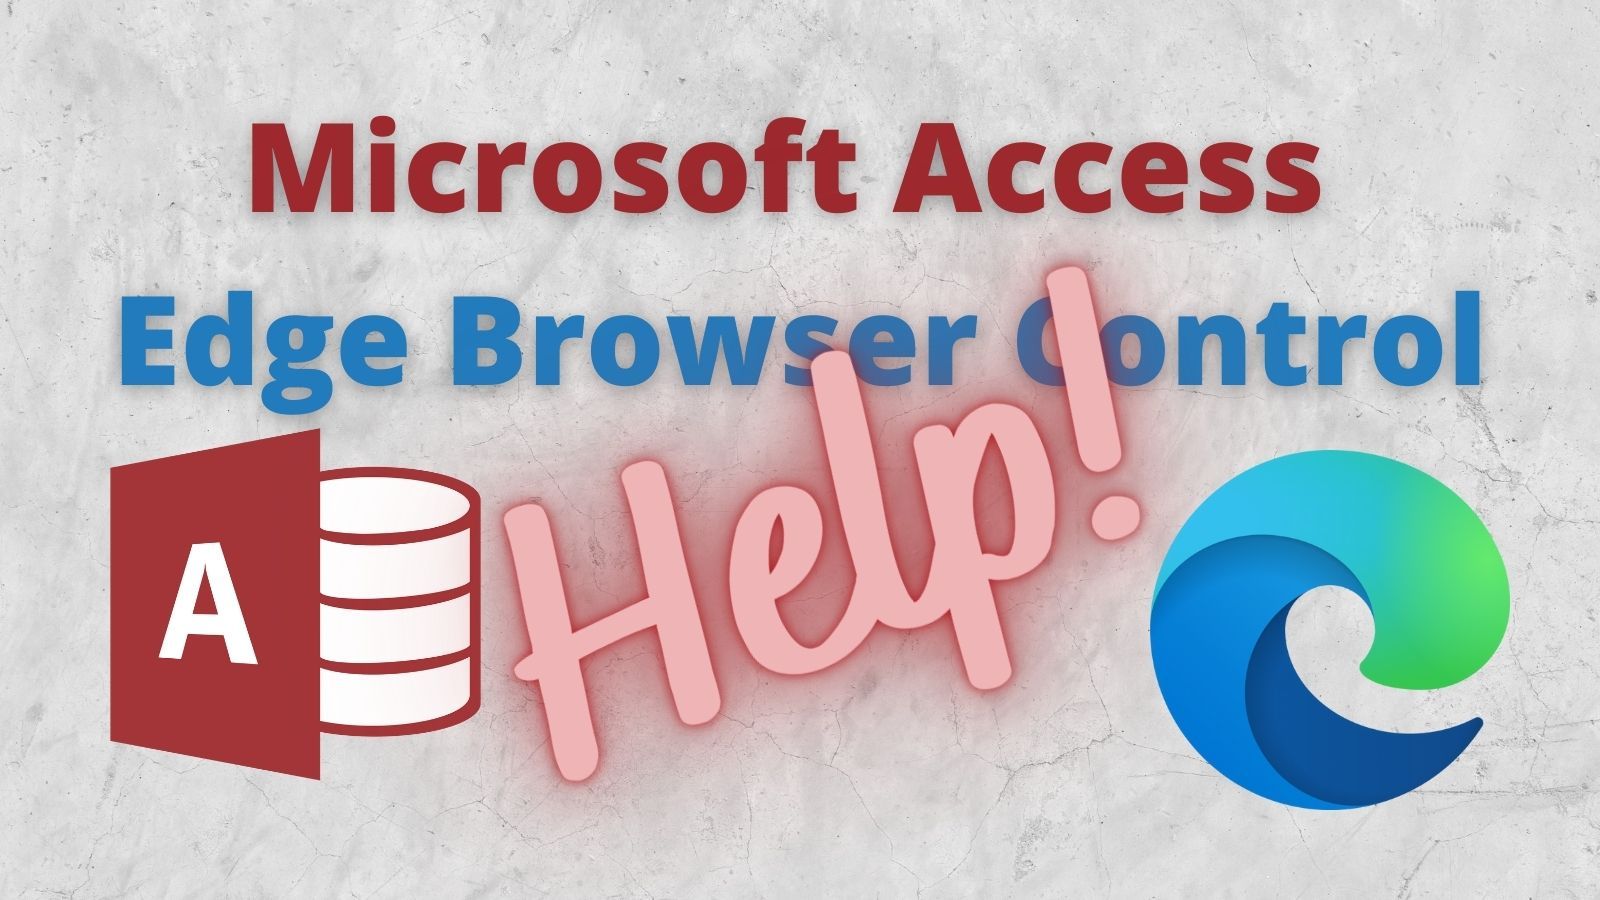 Resources for the Modern Edge-Based Browser Control in Microsoft Access